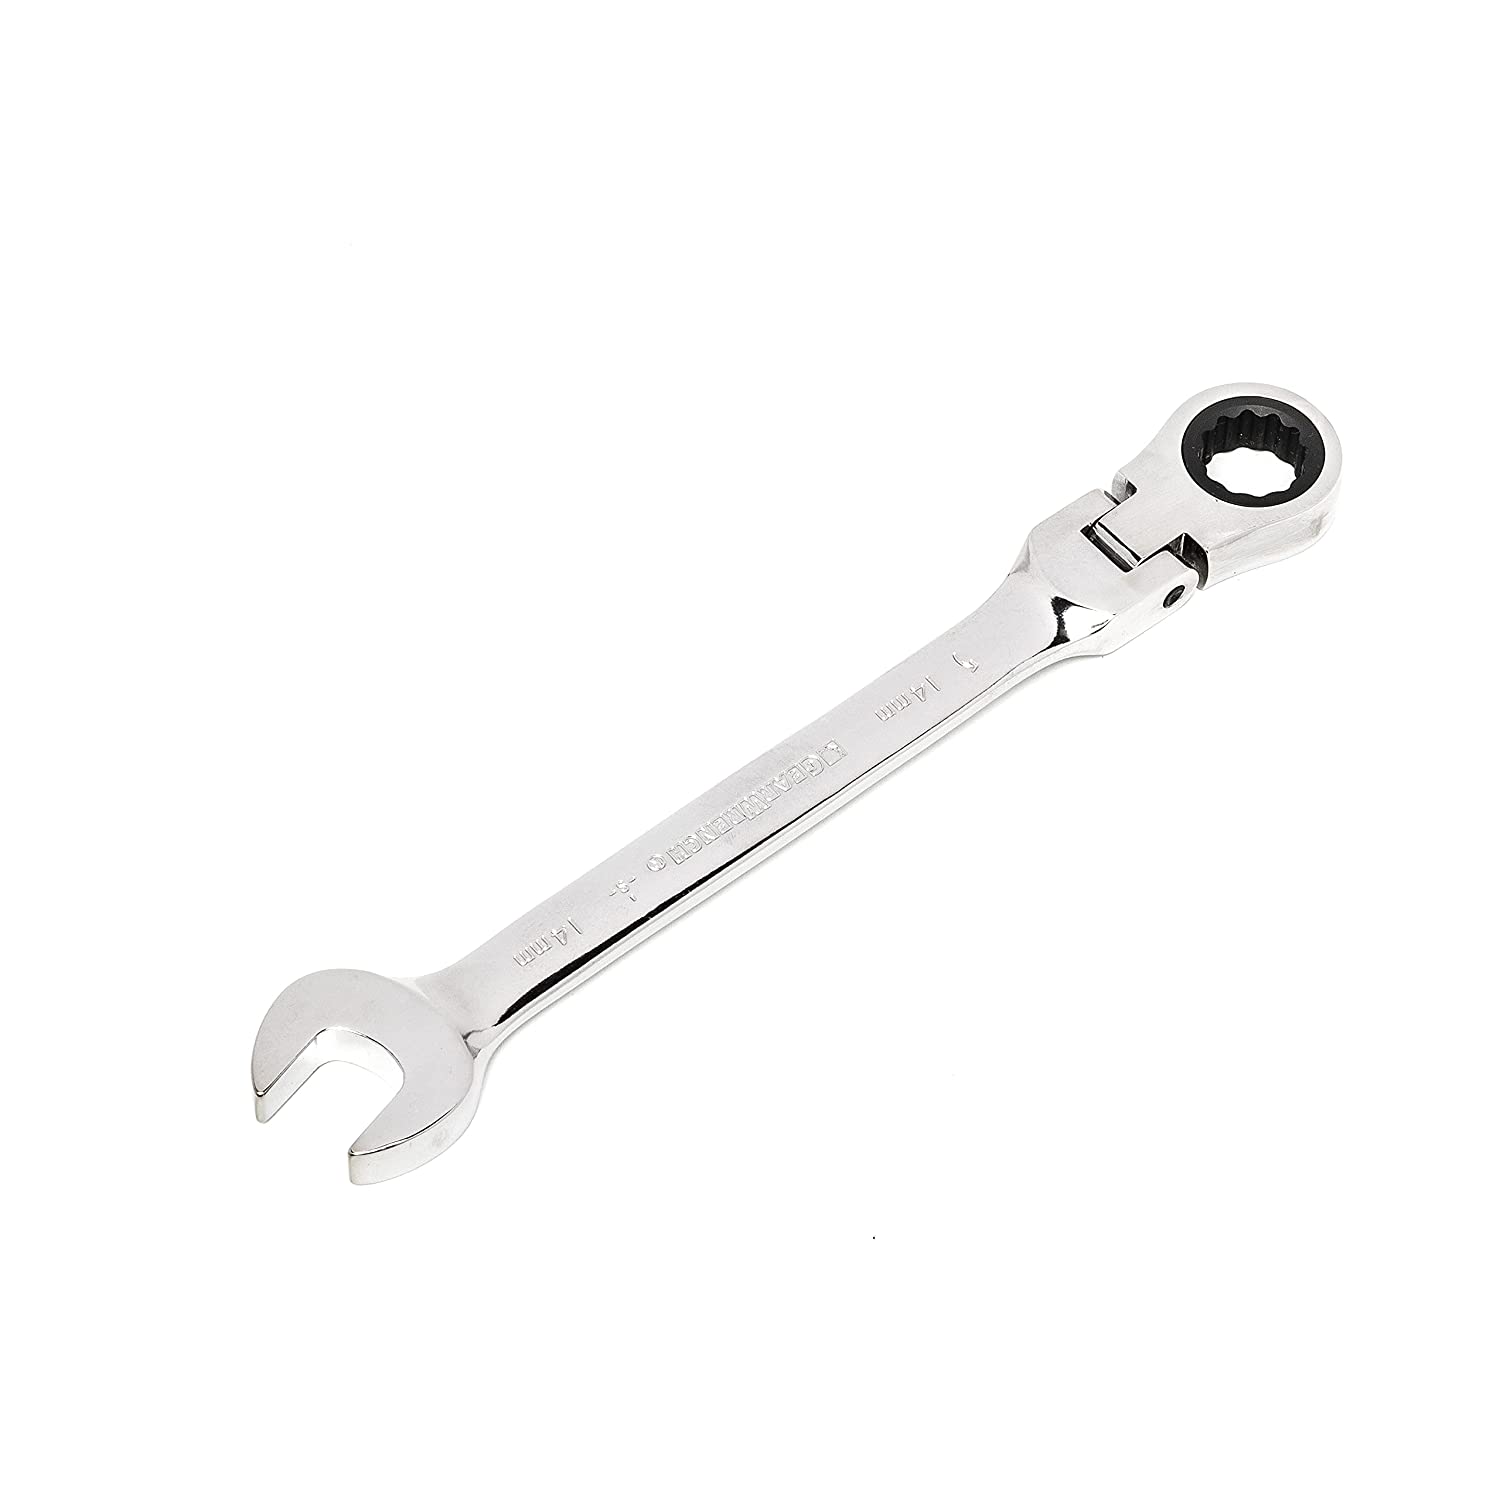 Flex-Head Combination Ratcheting Spanner 14mm Heavy Duty Hand Tool - Gear Wrench